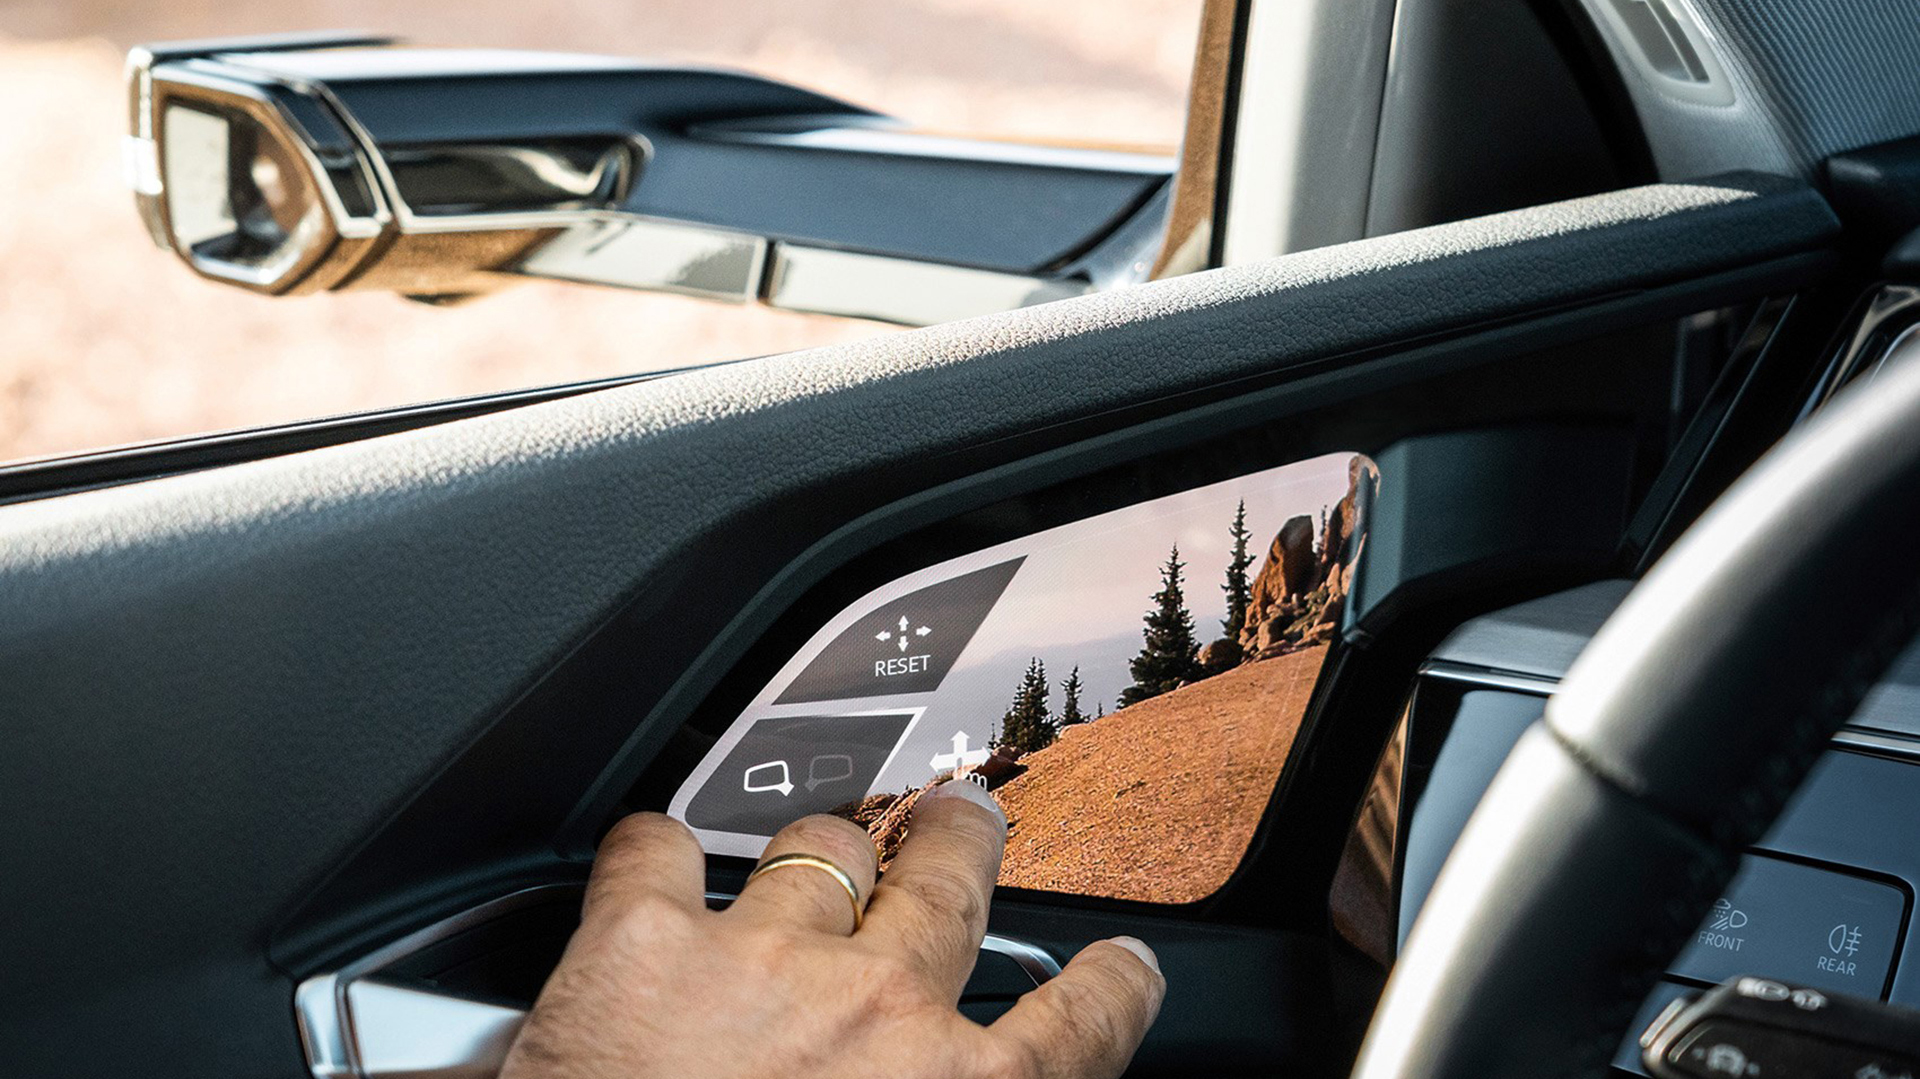 The screen inside the door shows what the cameras in the traditional place of the Audi e-tron's mirrors see.